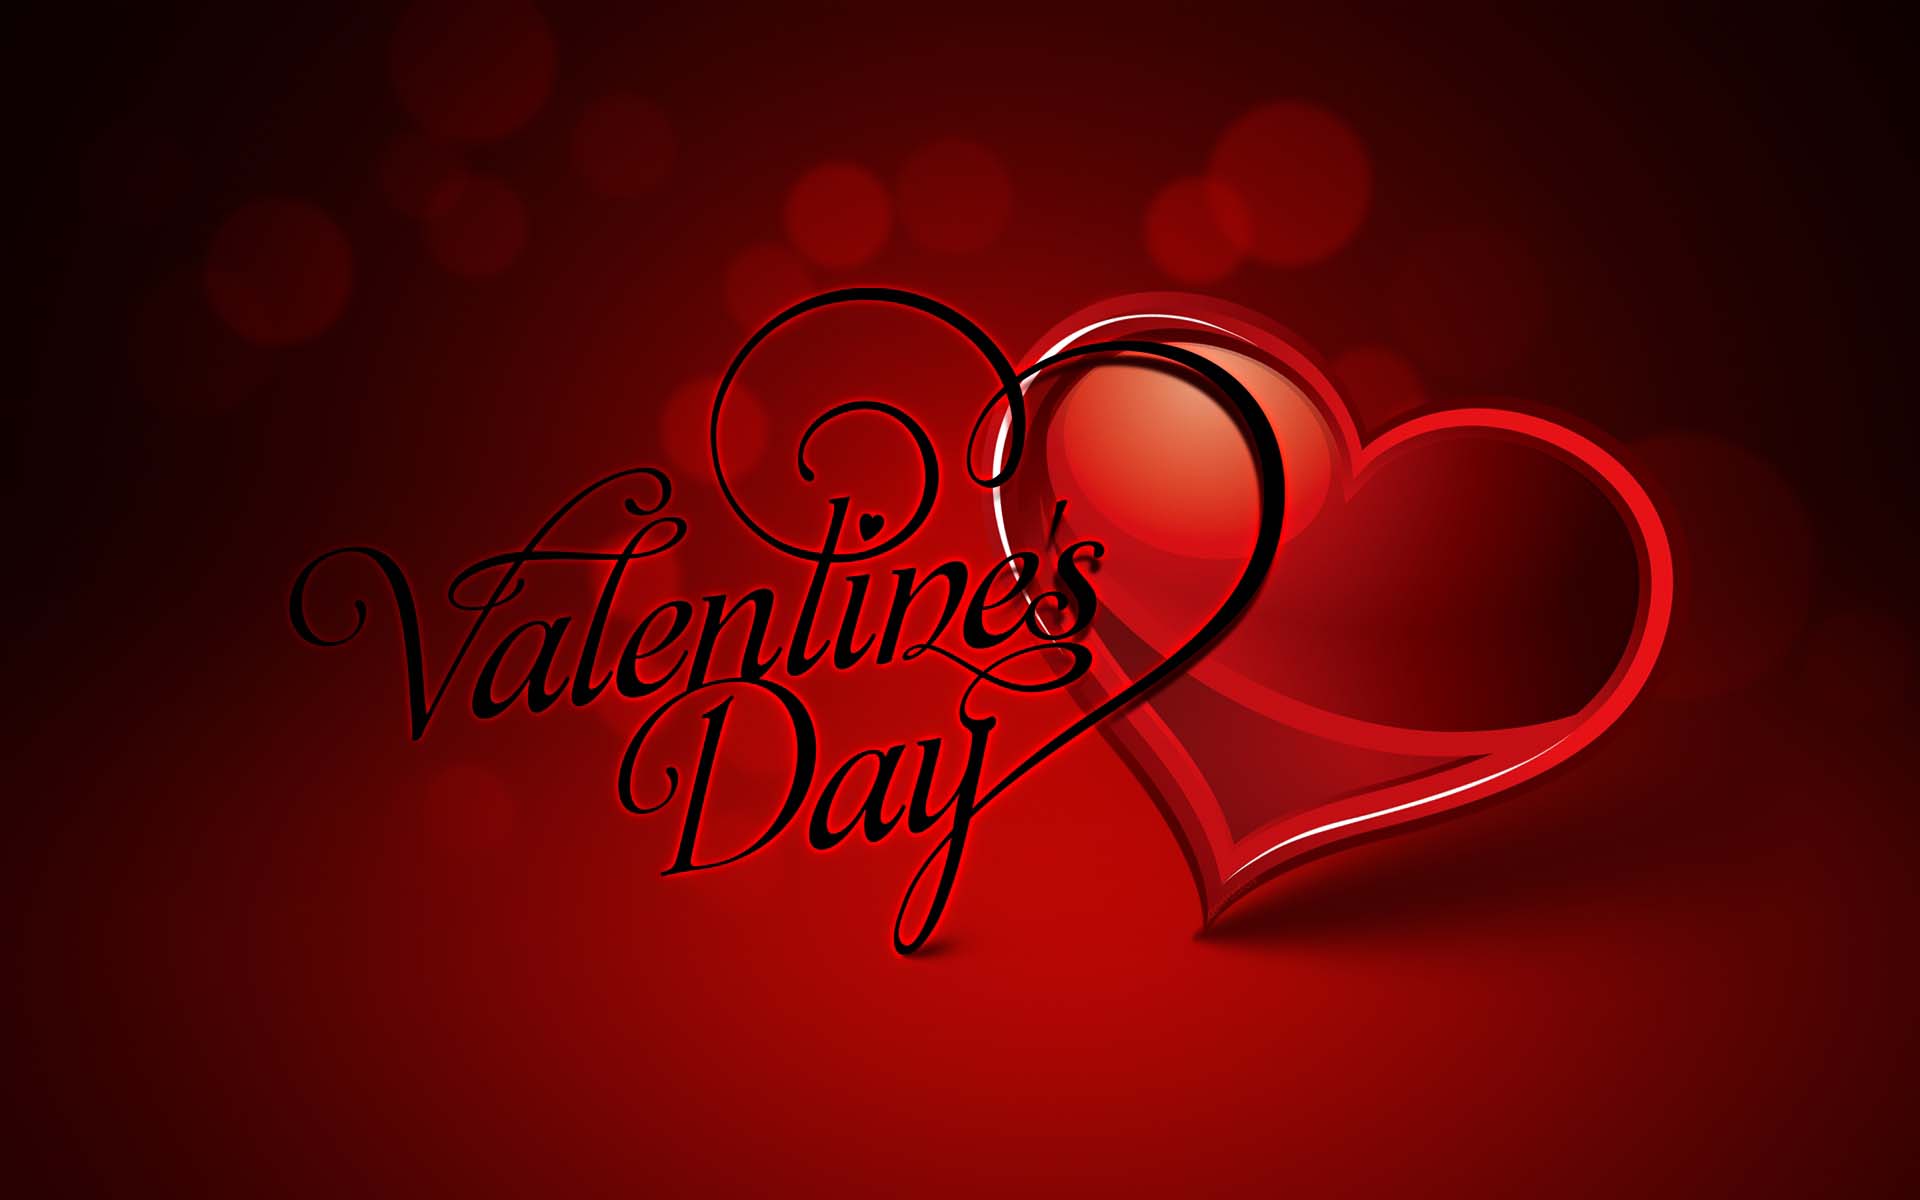 Happy Valentines Day Special Wide Wallpaper 1920×1200. Cool PC